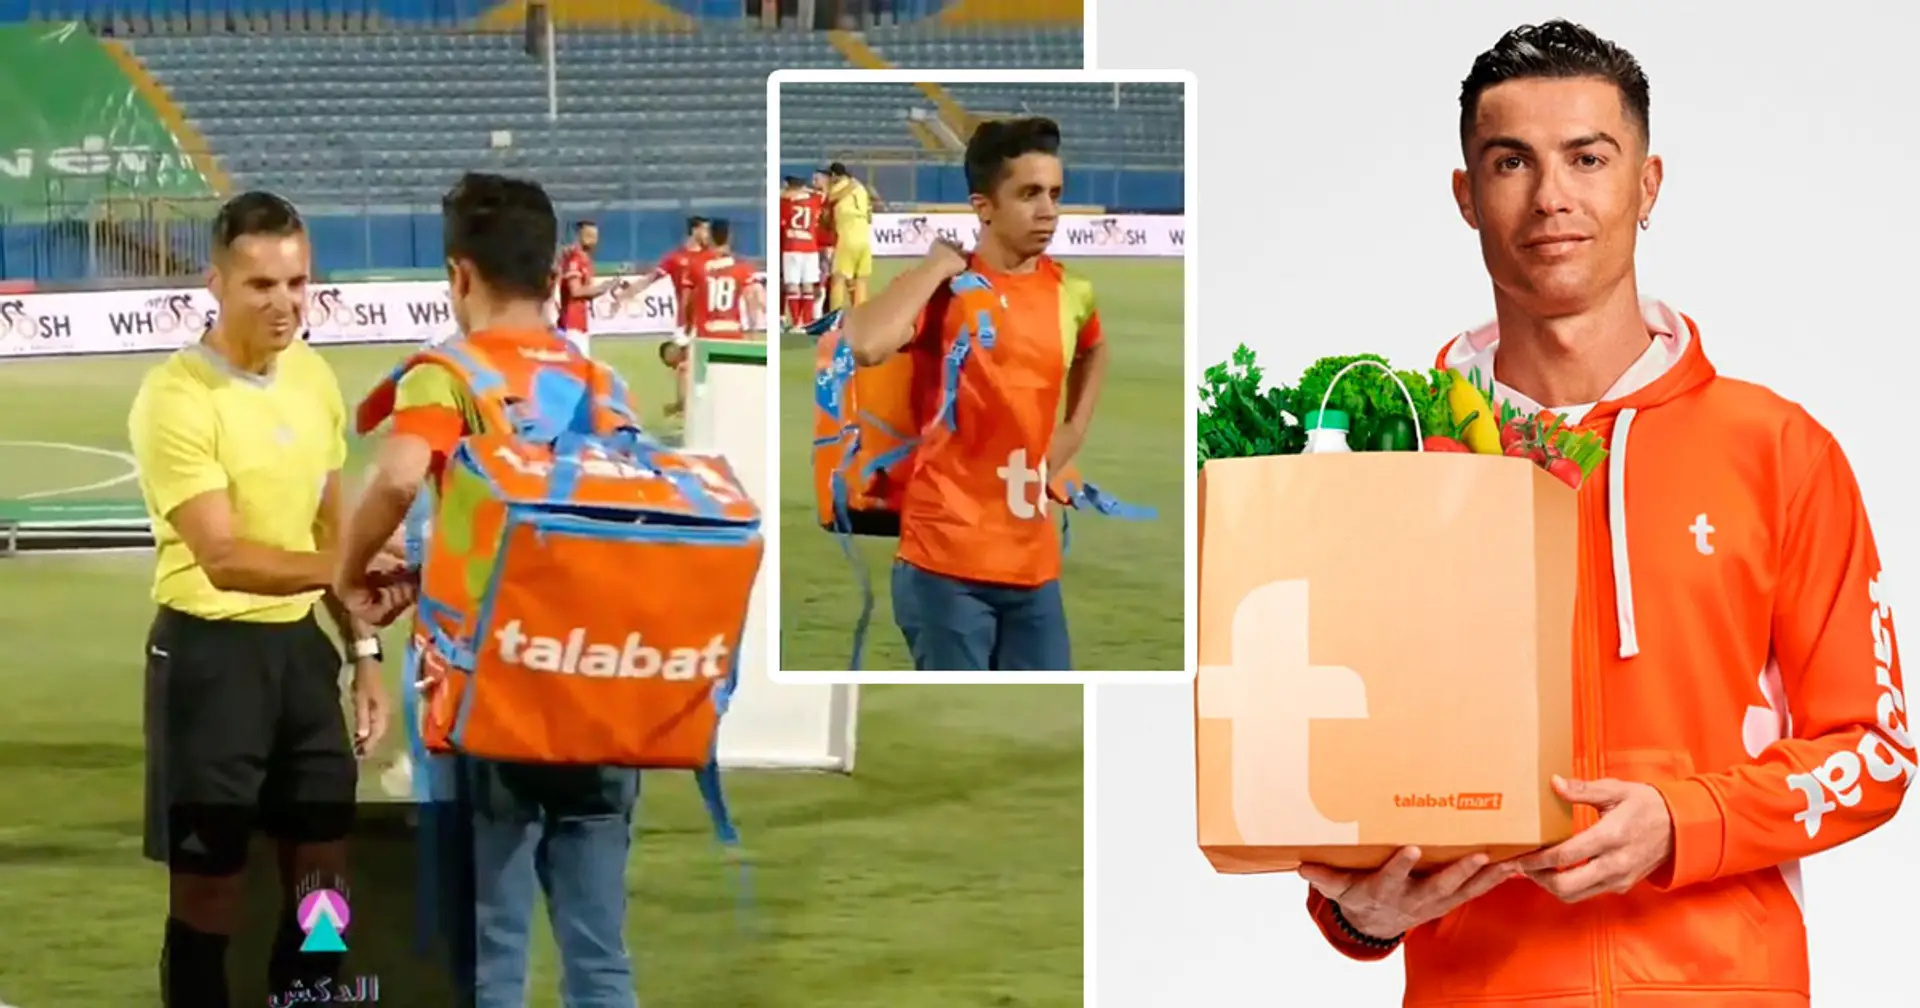 Food delivery service brings kick-off ball in Egyptian league match